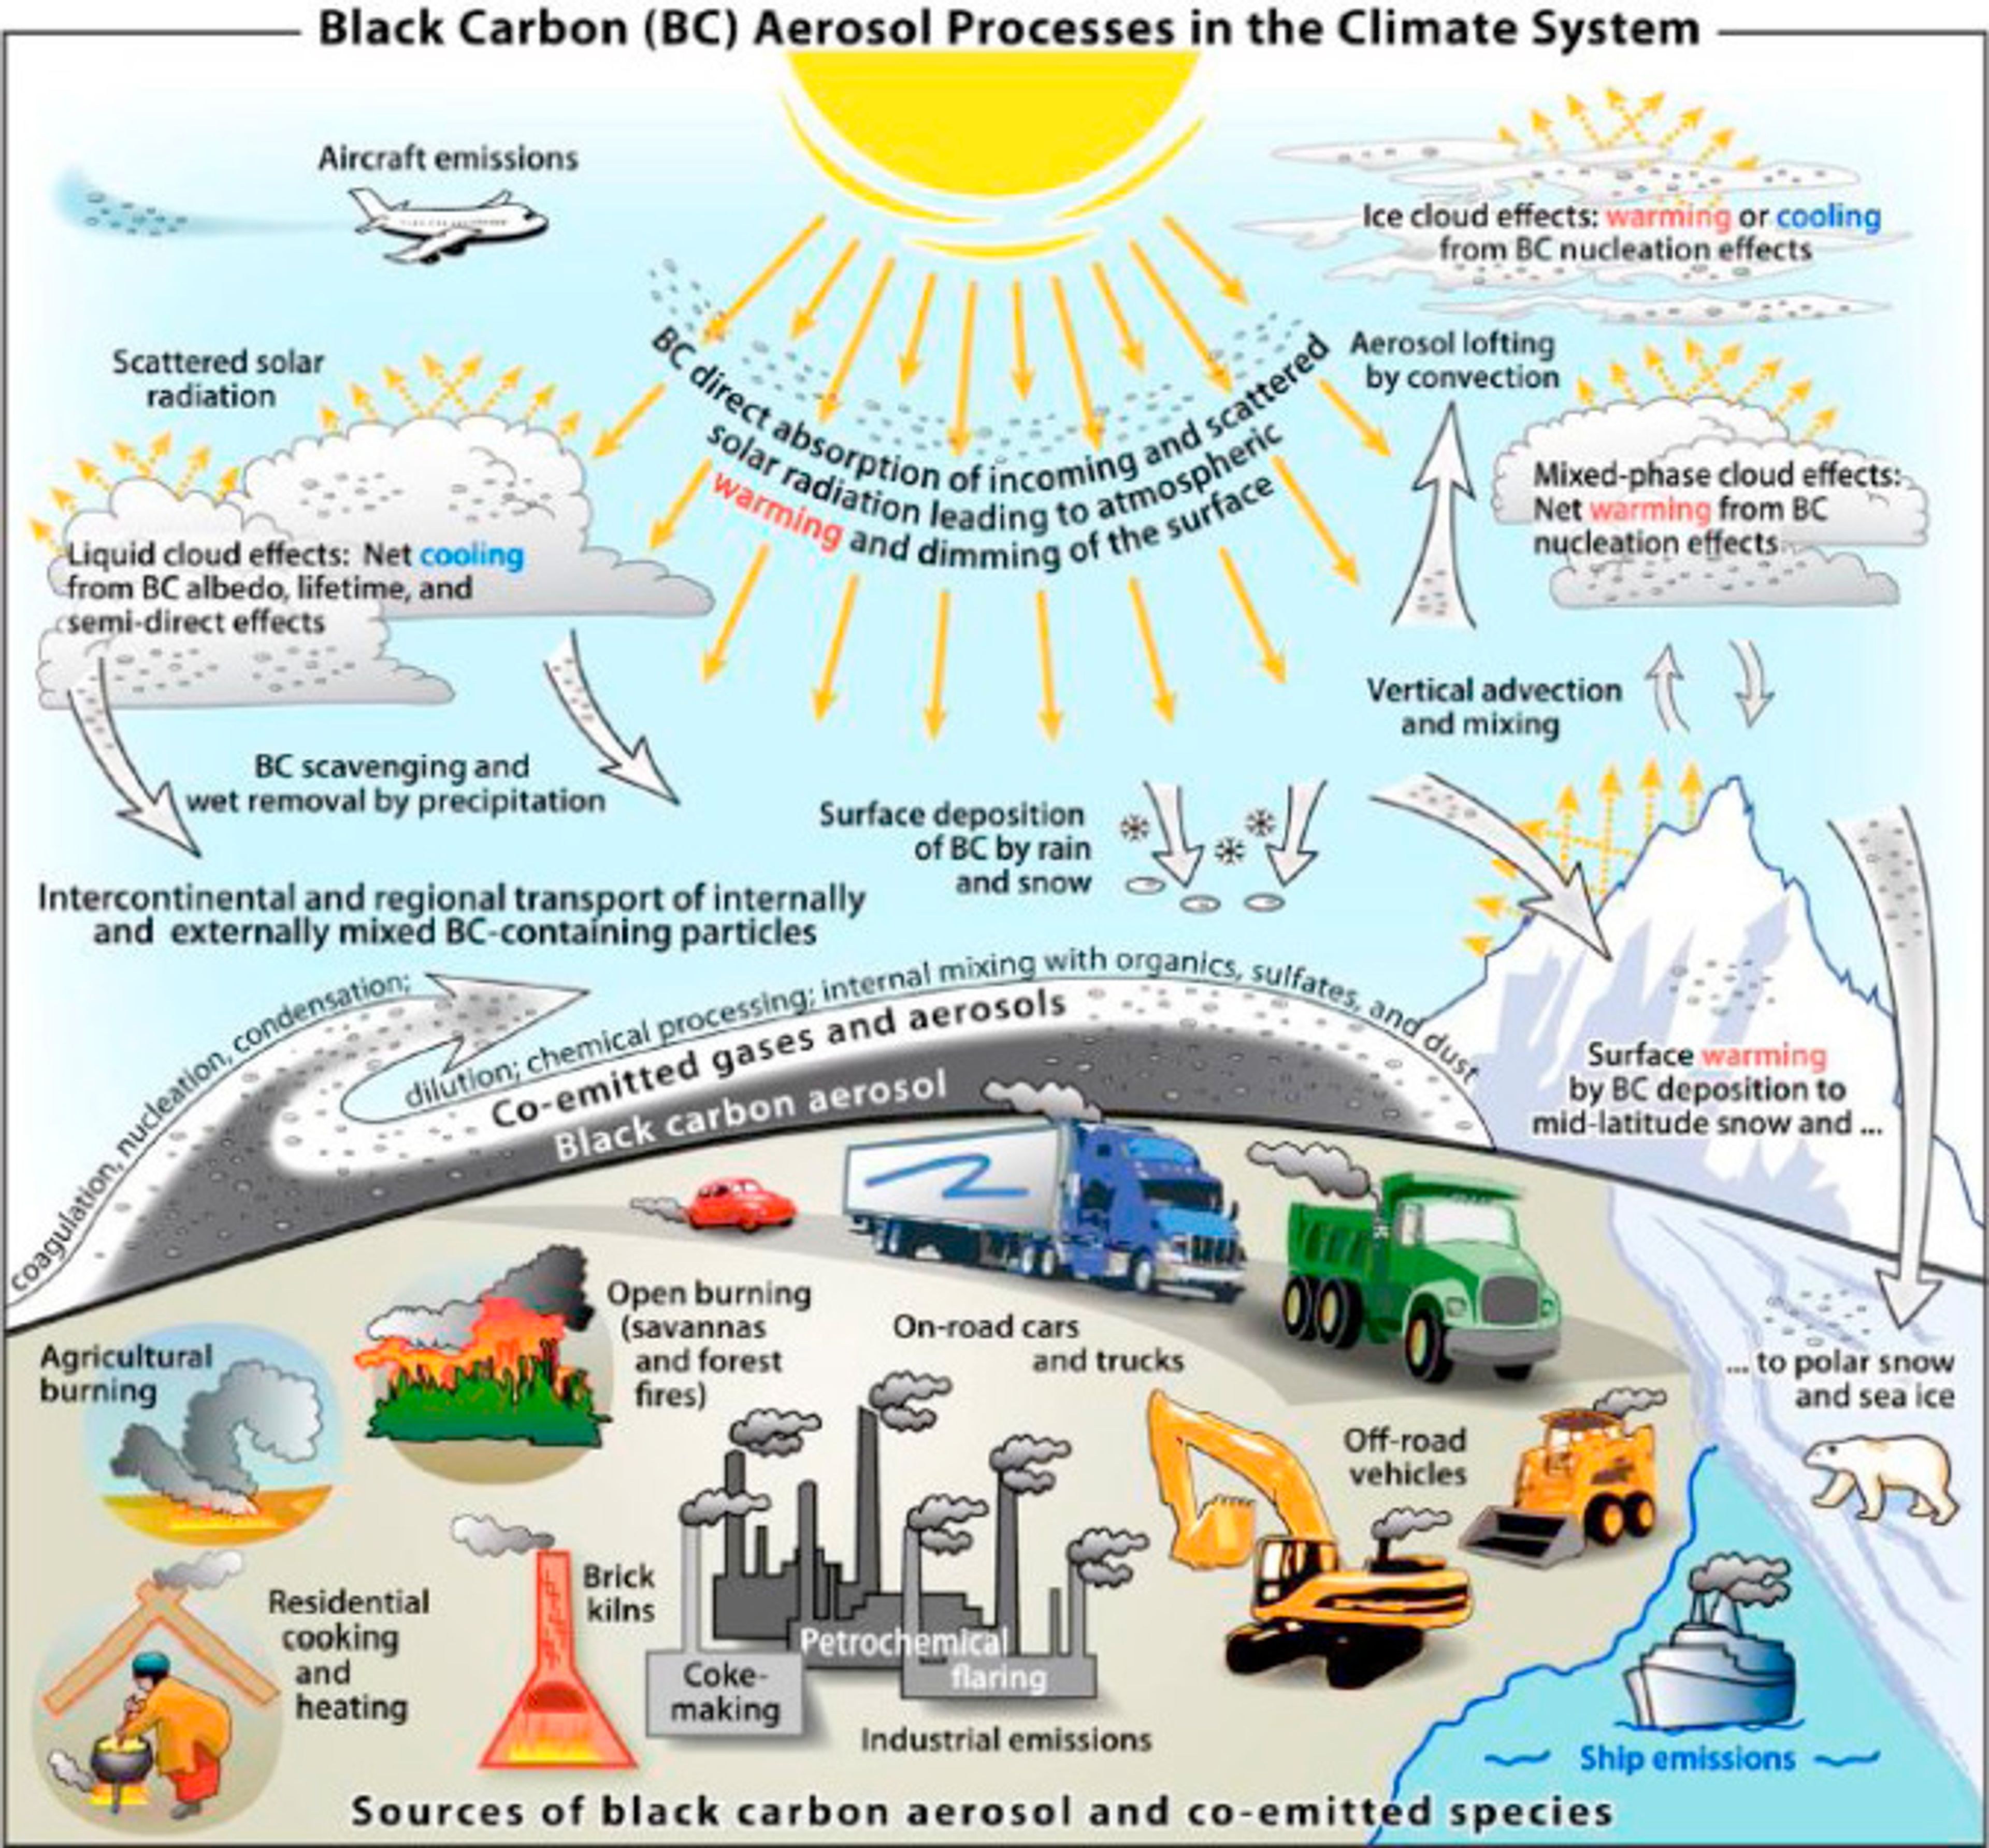 Cover Image for CAUSES OF CLIMATE CHANGE